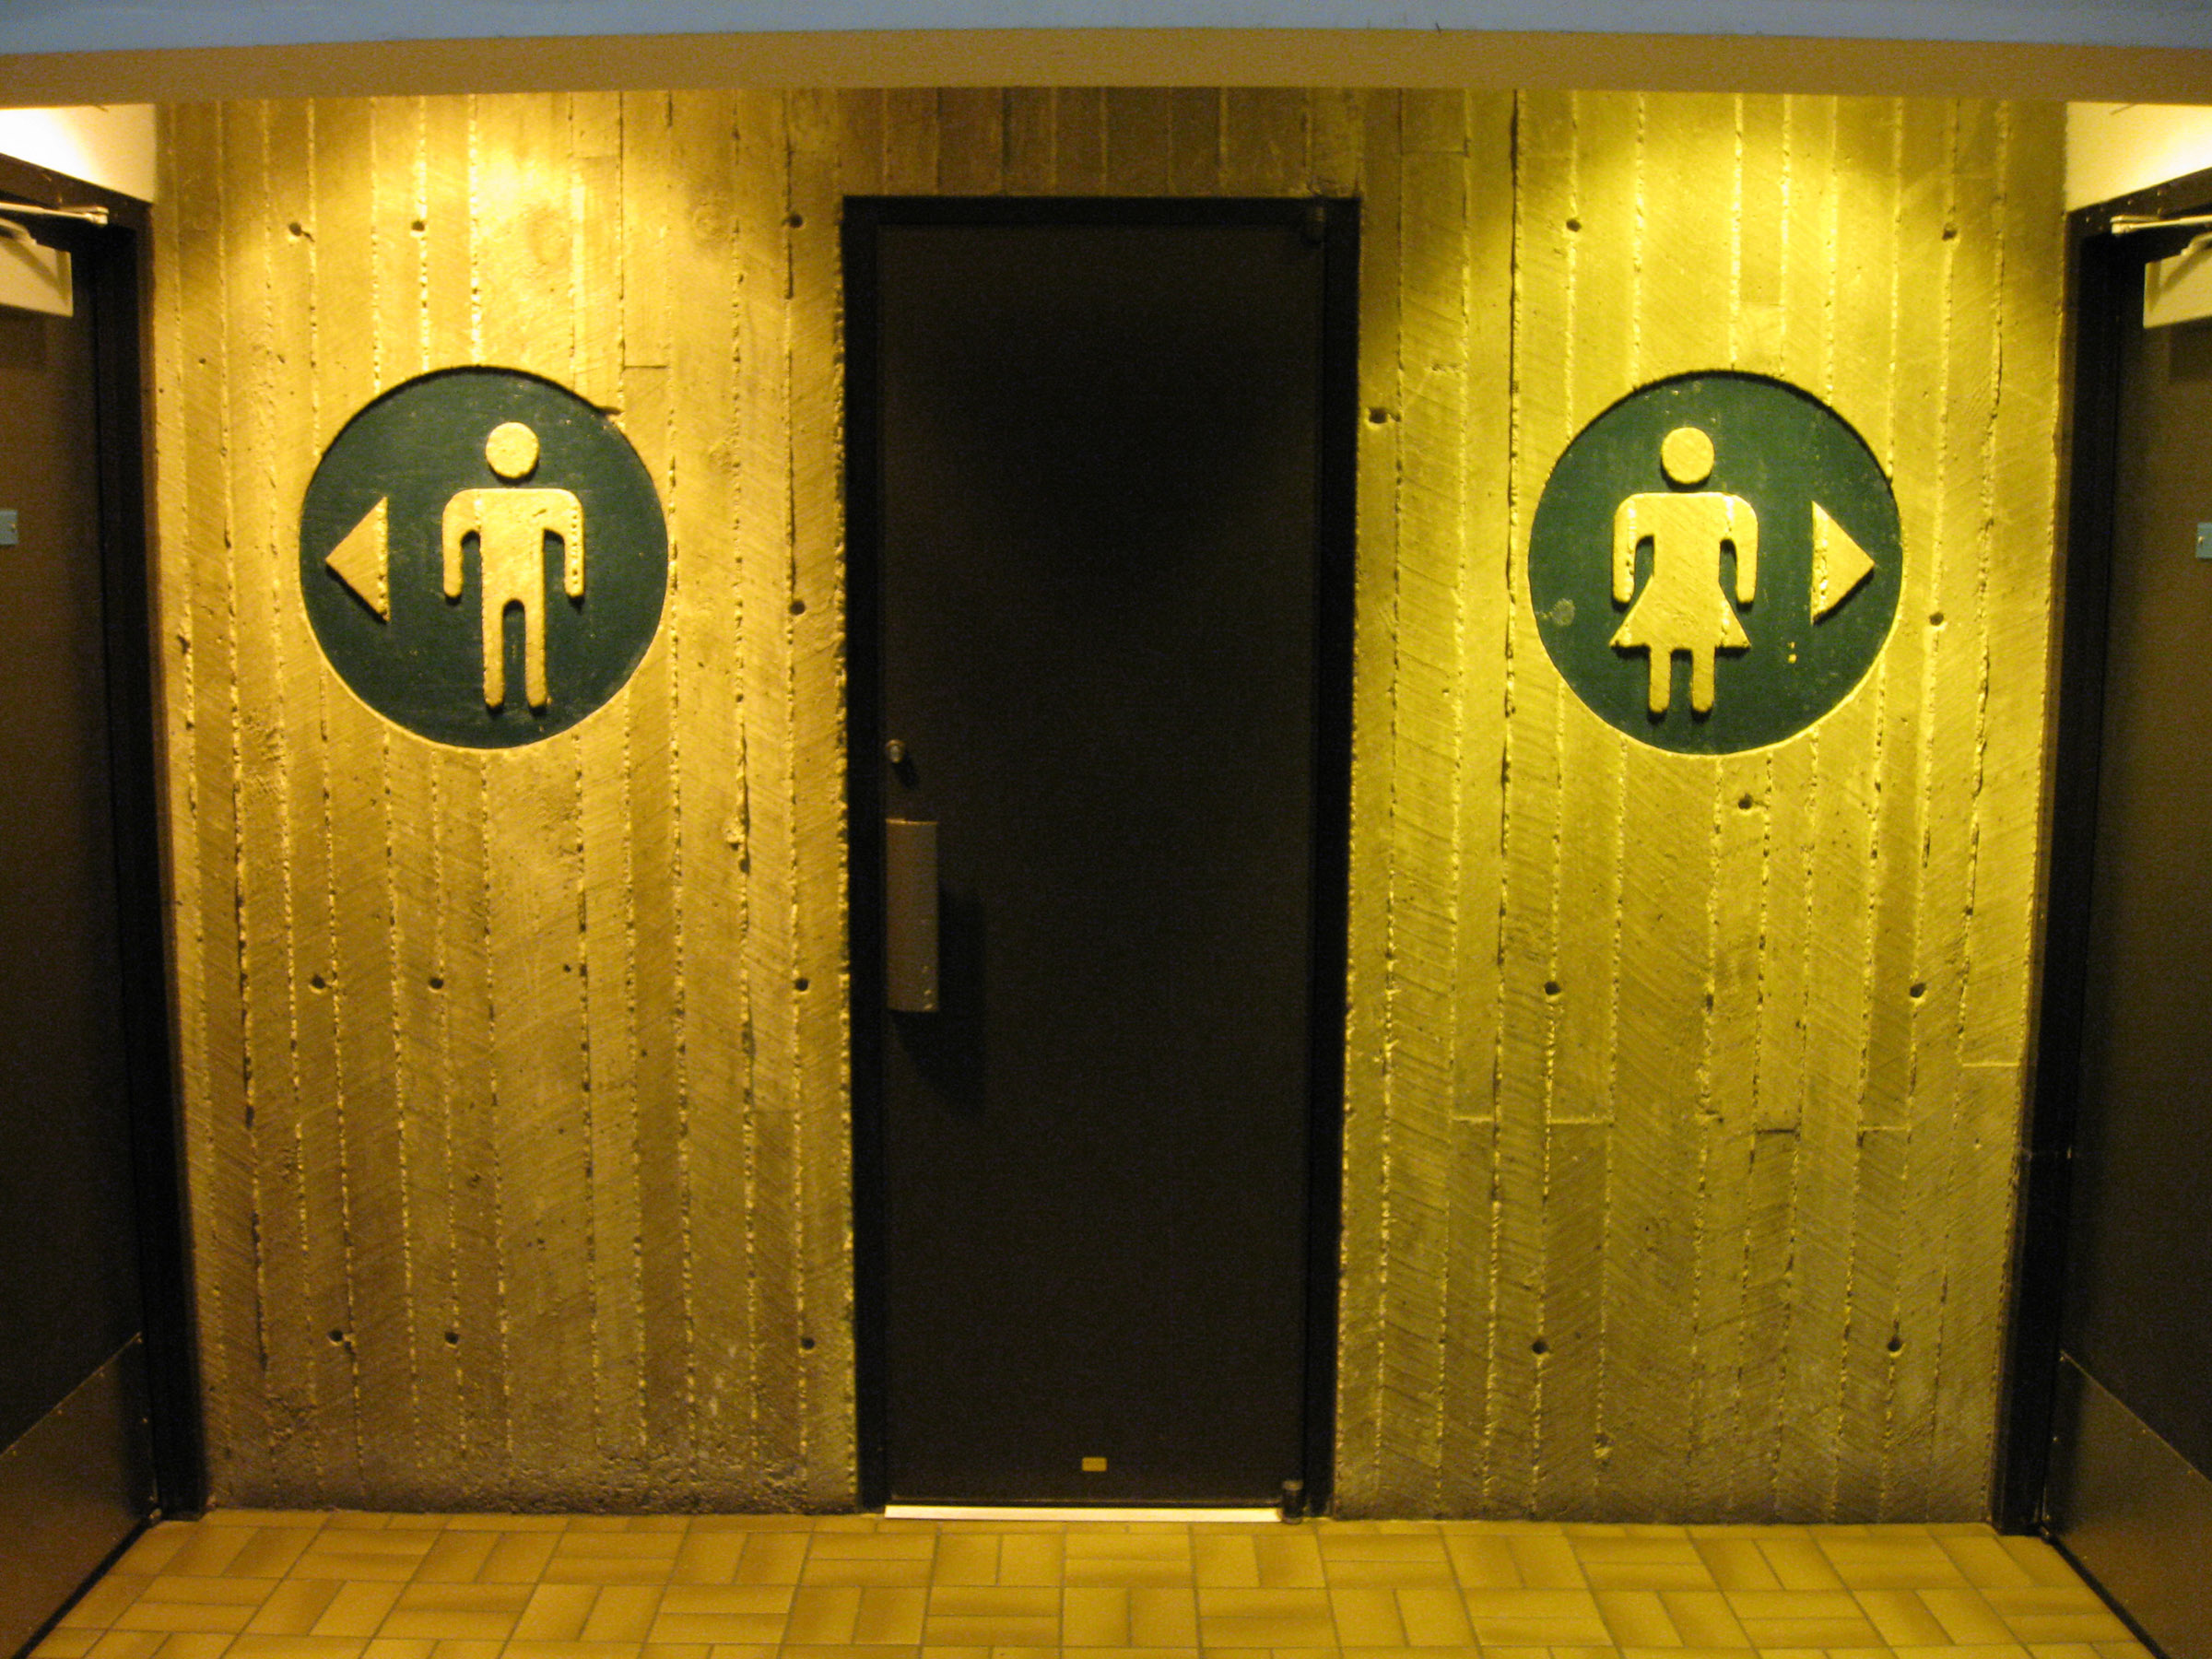 Bathroom signs for male and female bathrooms on a wall.